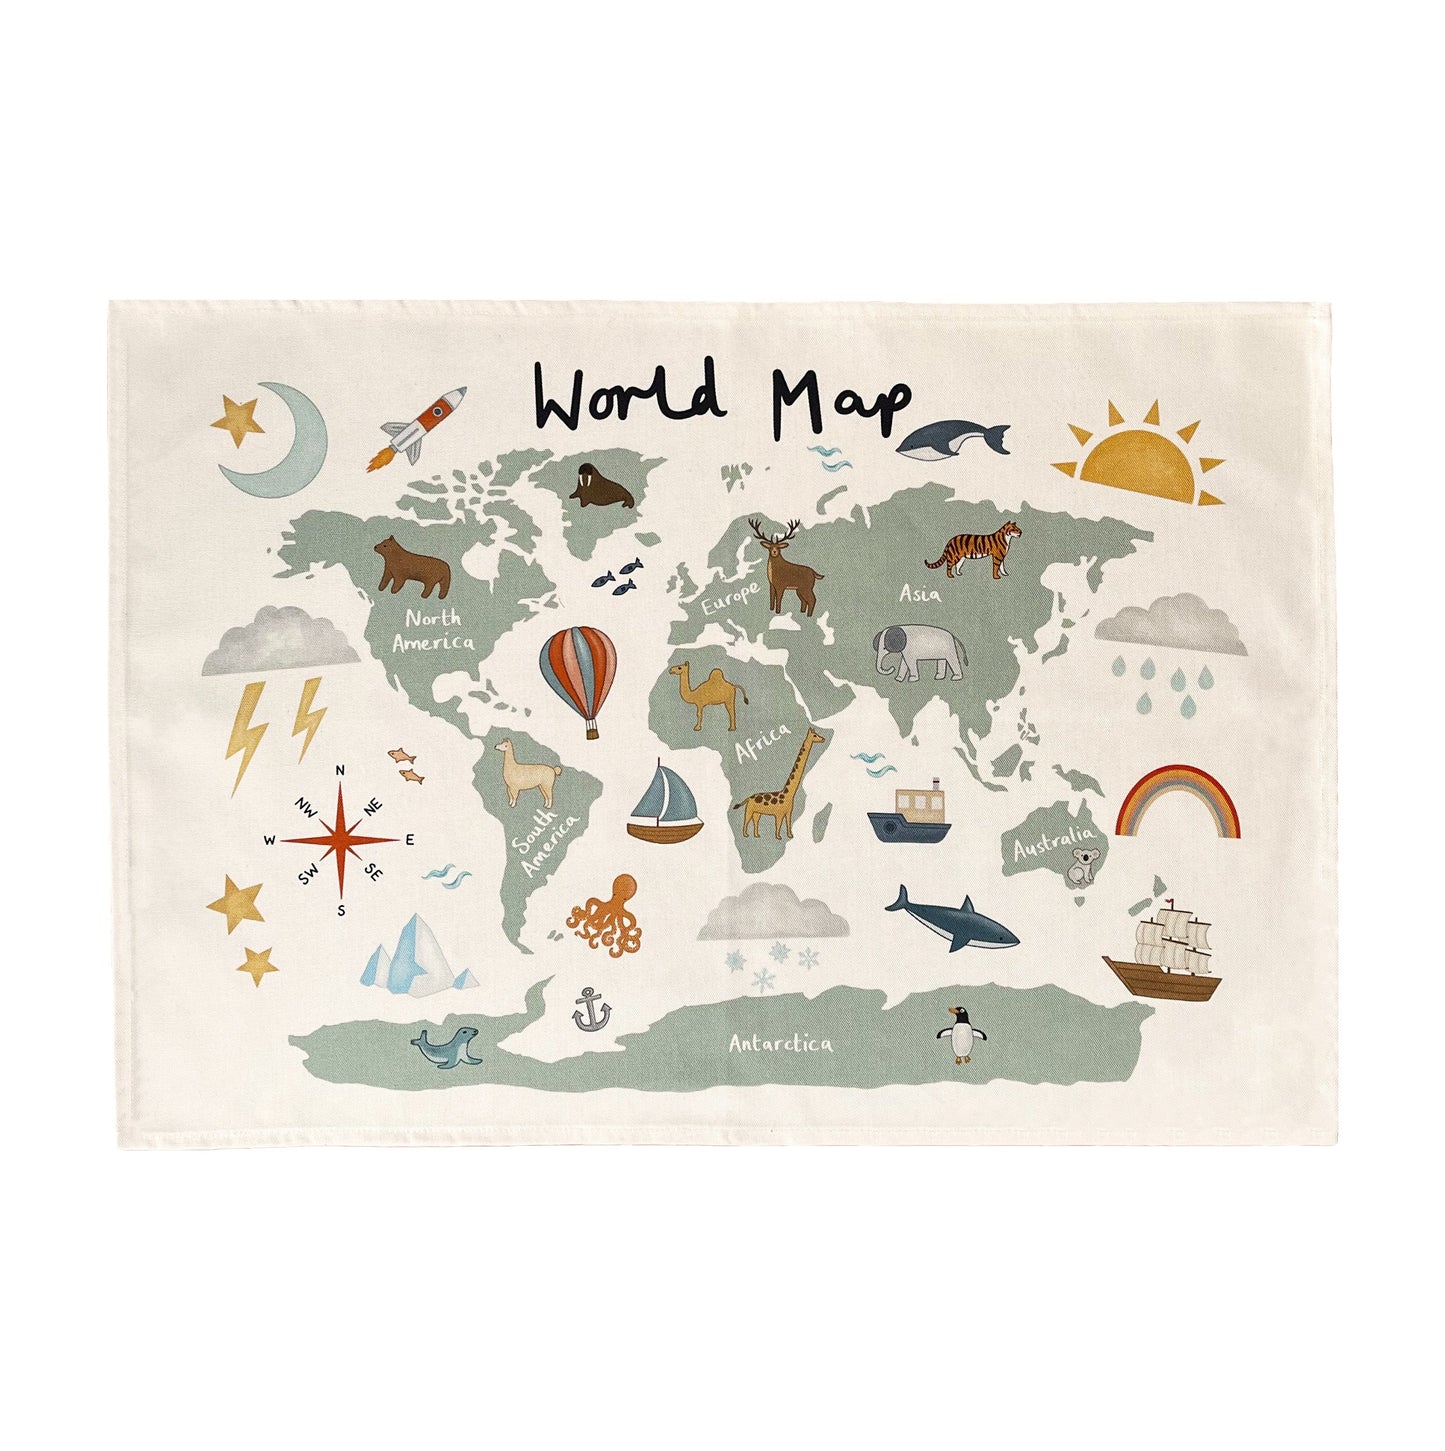 IMPERFECT SALE - World Map Wall Hanging (Small)